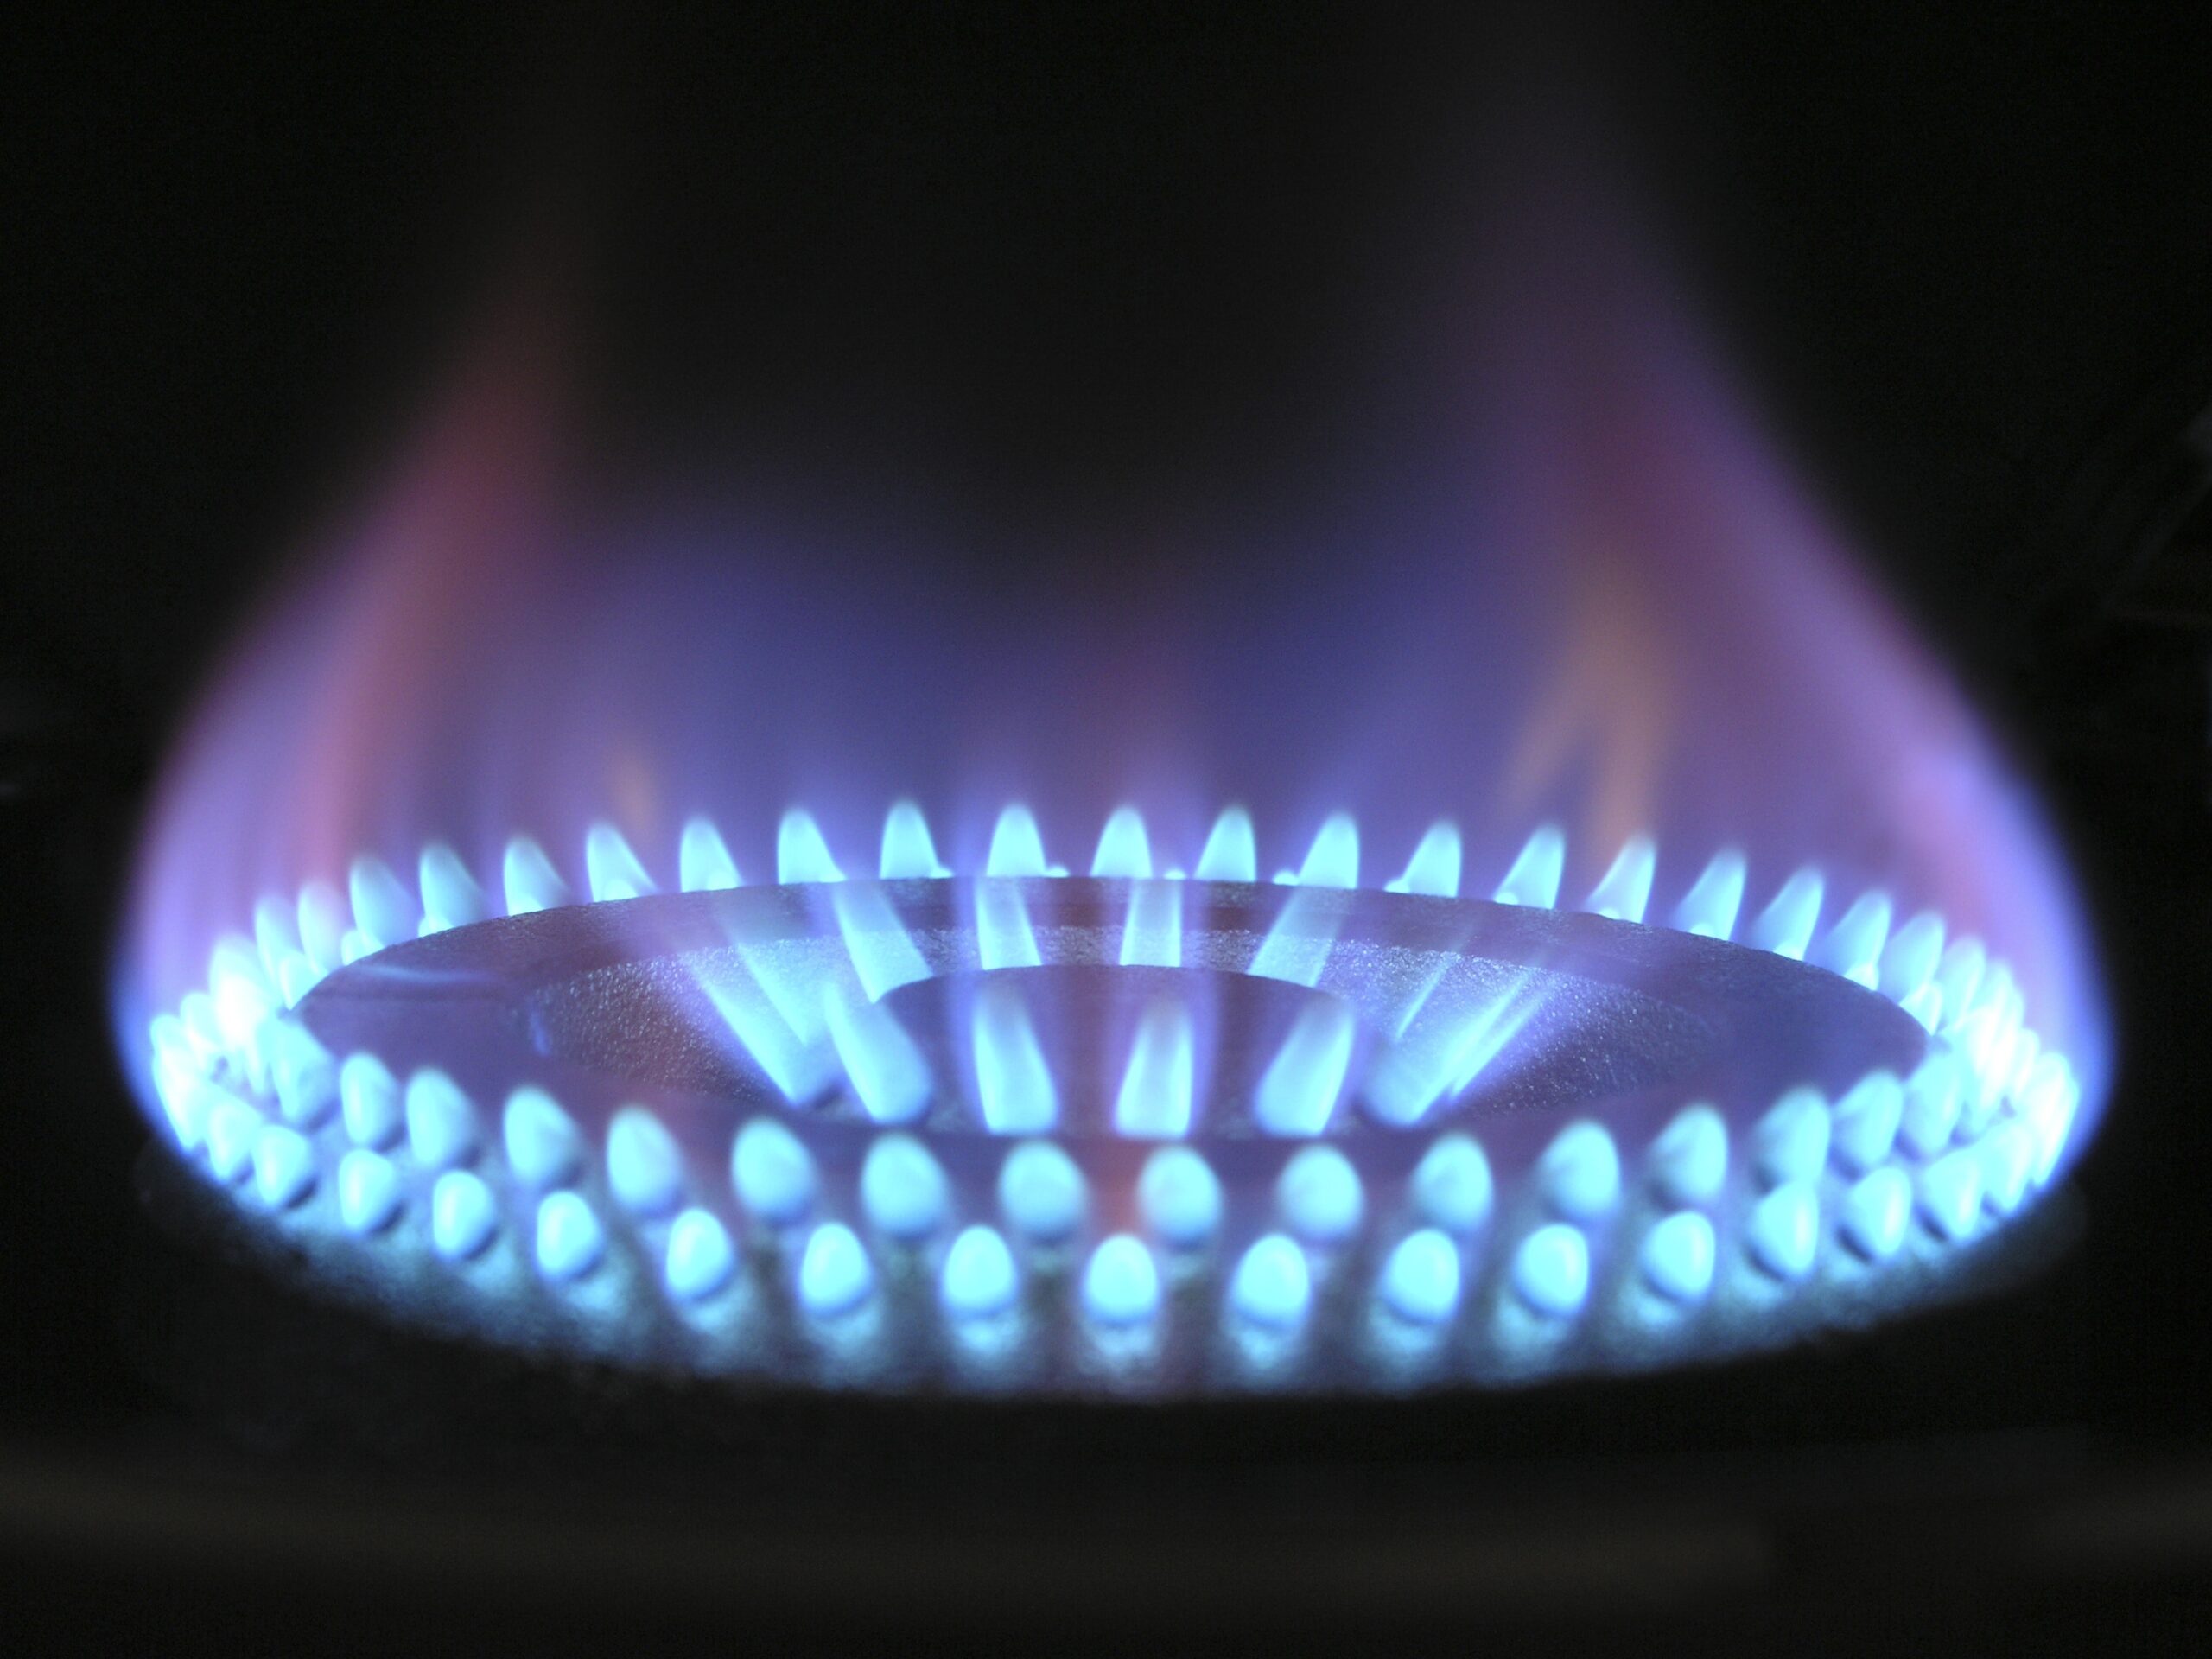 European Prices on Natural Gas are Suddenly Plumming